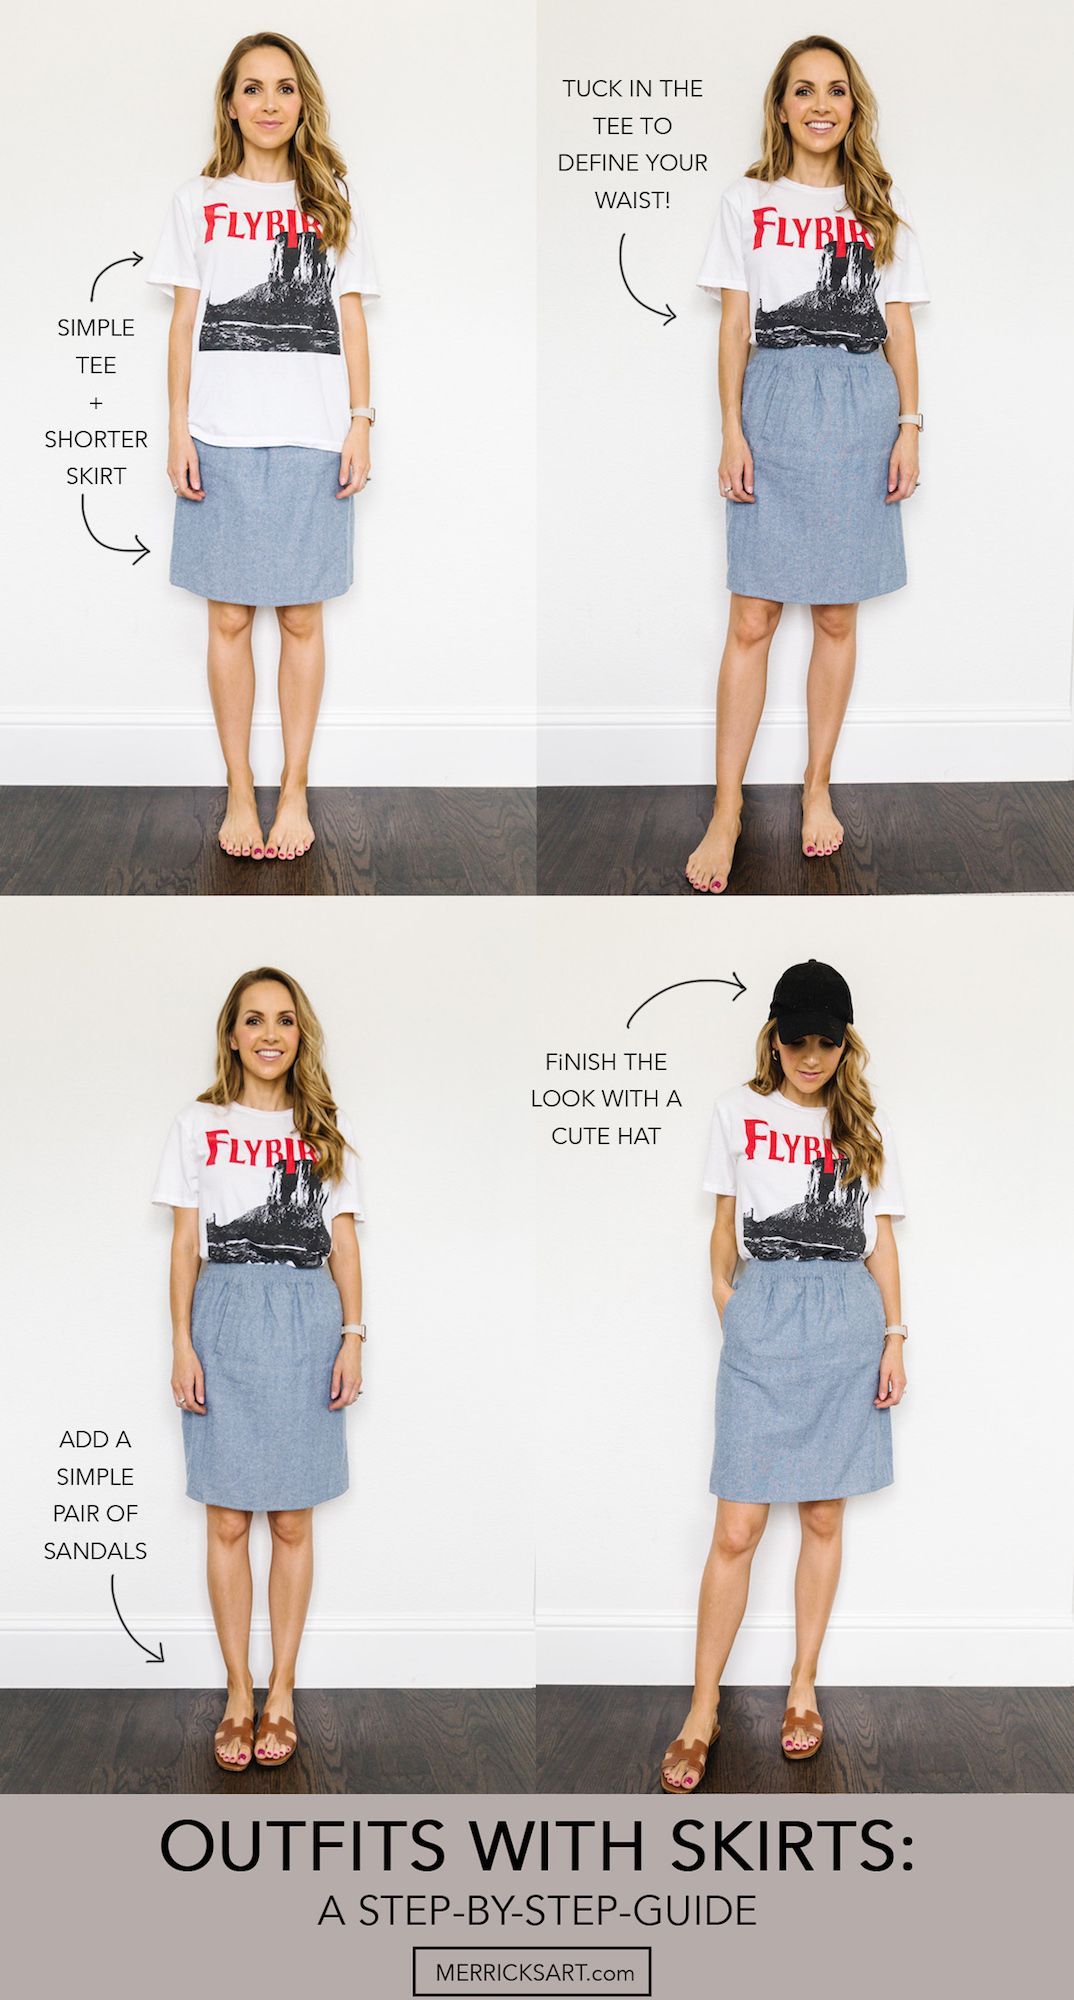 Step By Step Putting Together 3 Outfits with Skirts | Merrick's Art - Step By Step Putting Together 3 Outfits with Skirts | Merrick's Art -   14 simple style Guides ideas